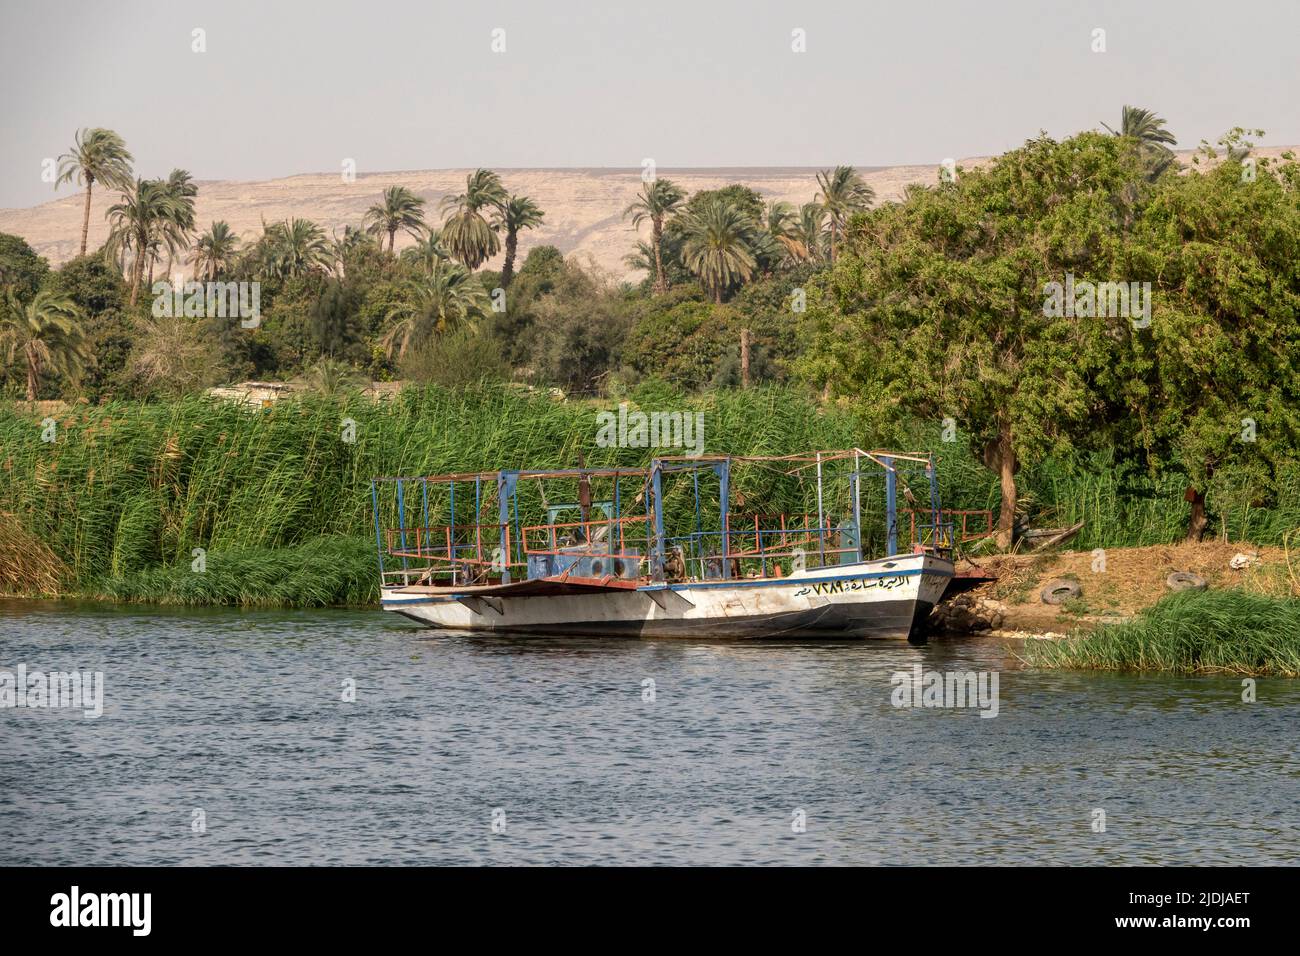 A small, rural local vehicle and passenger ferry moored on the bank of the river Nile, with palms, trees and small mountain range in the background Stock Photo